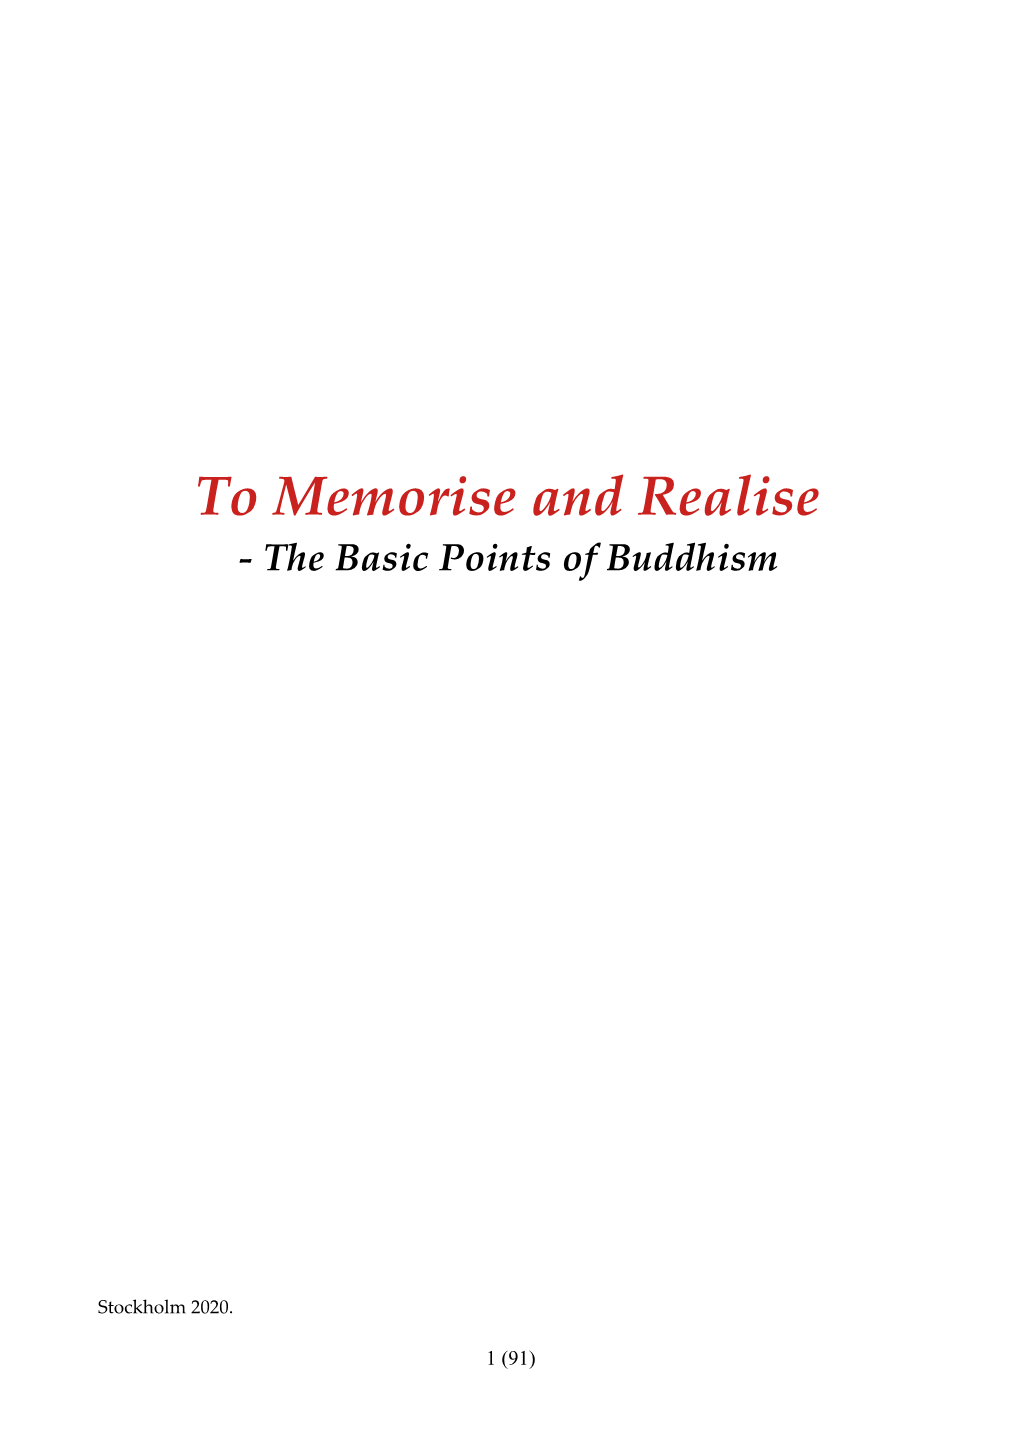 To Memorise and Realise Edited by Magnus Wåhlberg